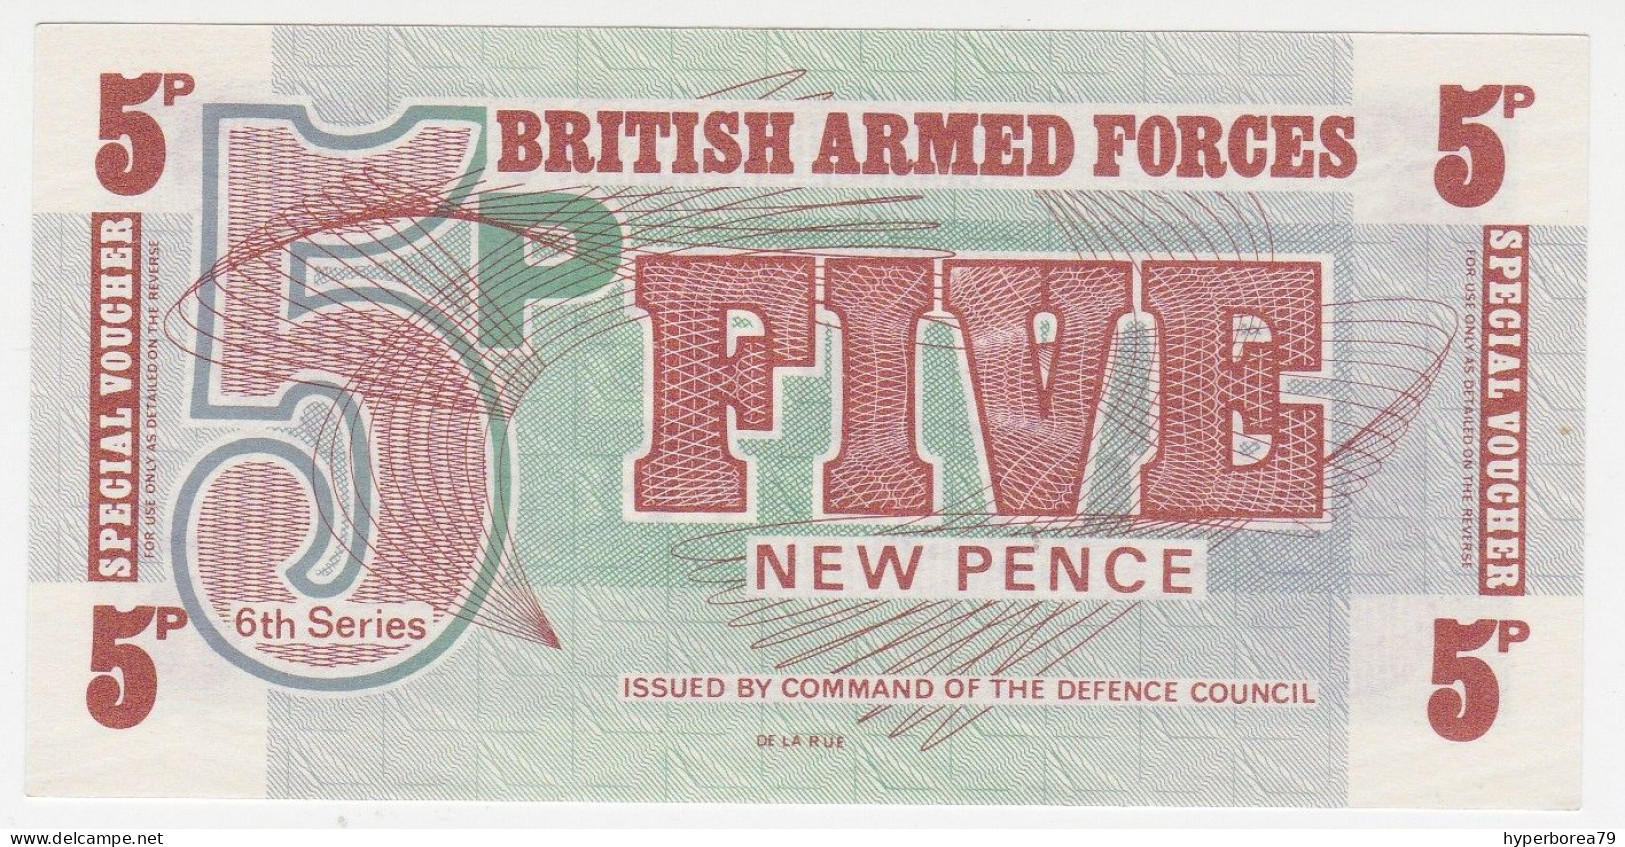 Great Britain BAF P M47 - 5 New Pence 1972 6th Series - UNC - British Armed Forces & Special Vouchers